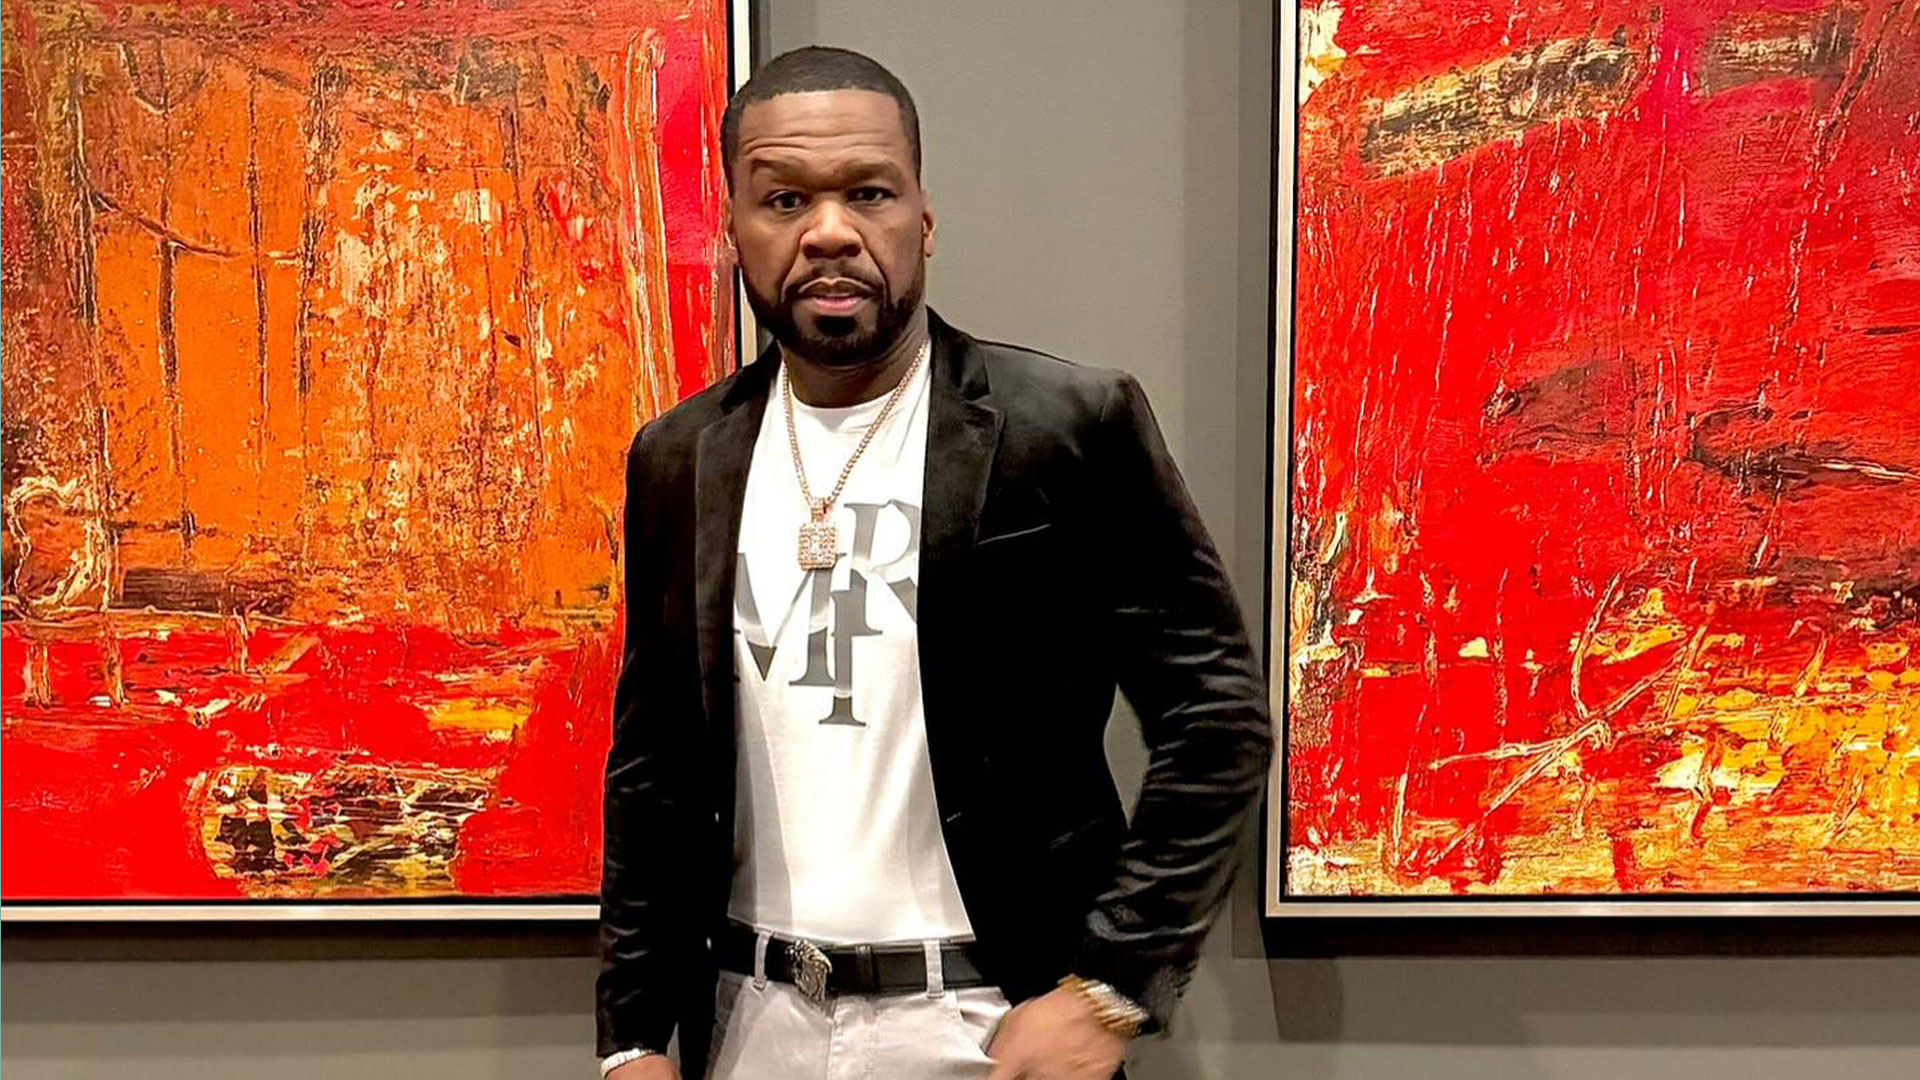 50 Cent responds to claims he uses Ozempic after dramatic 40-lb weight loss – but fans call out alarming detail in video